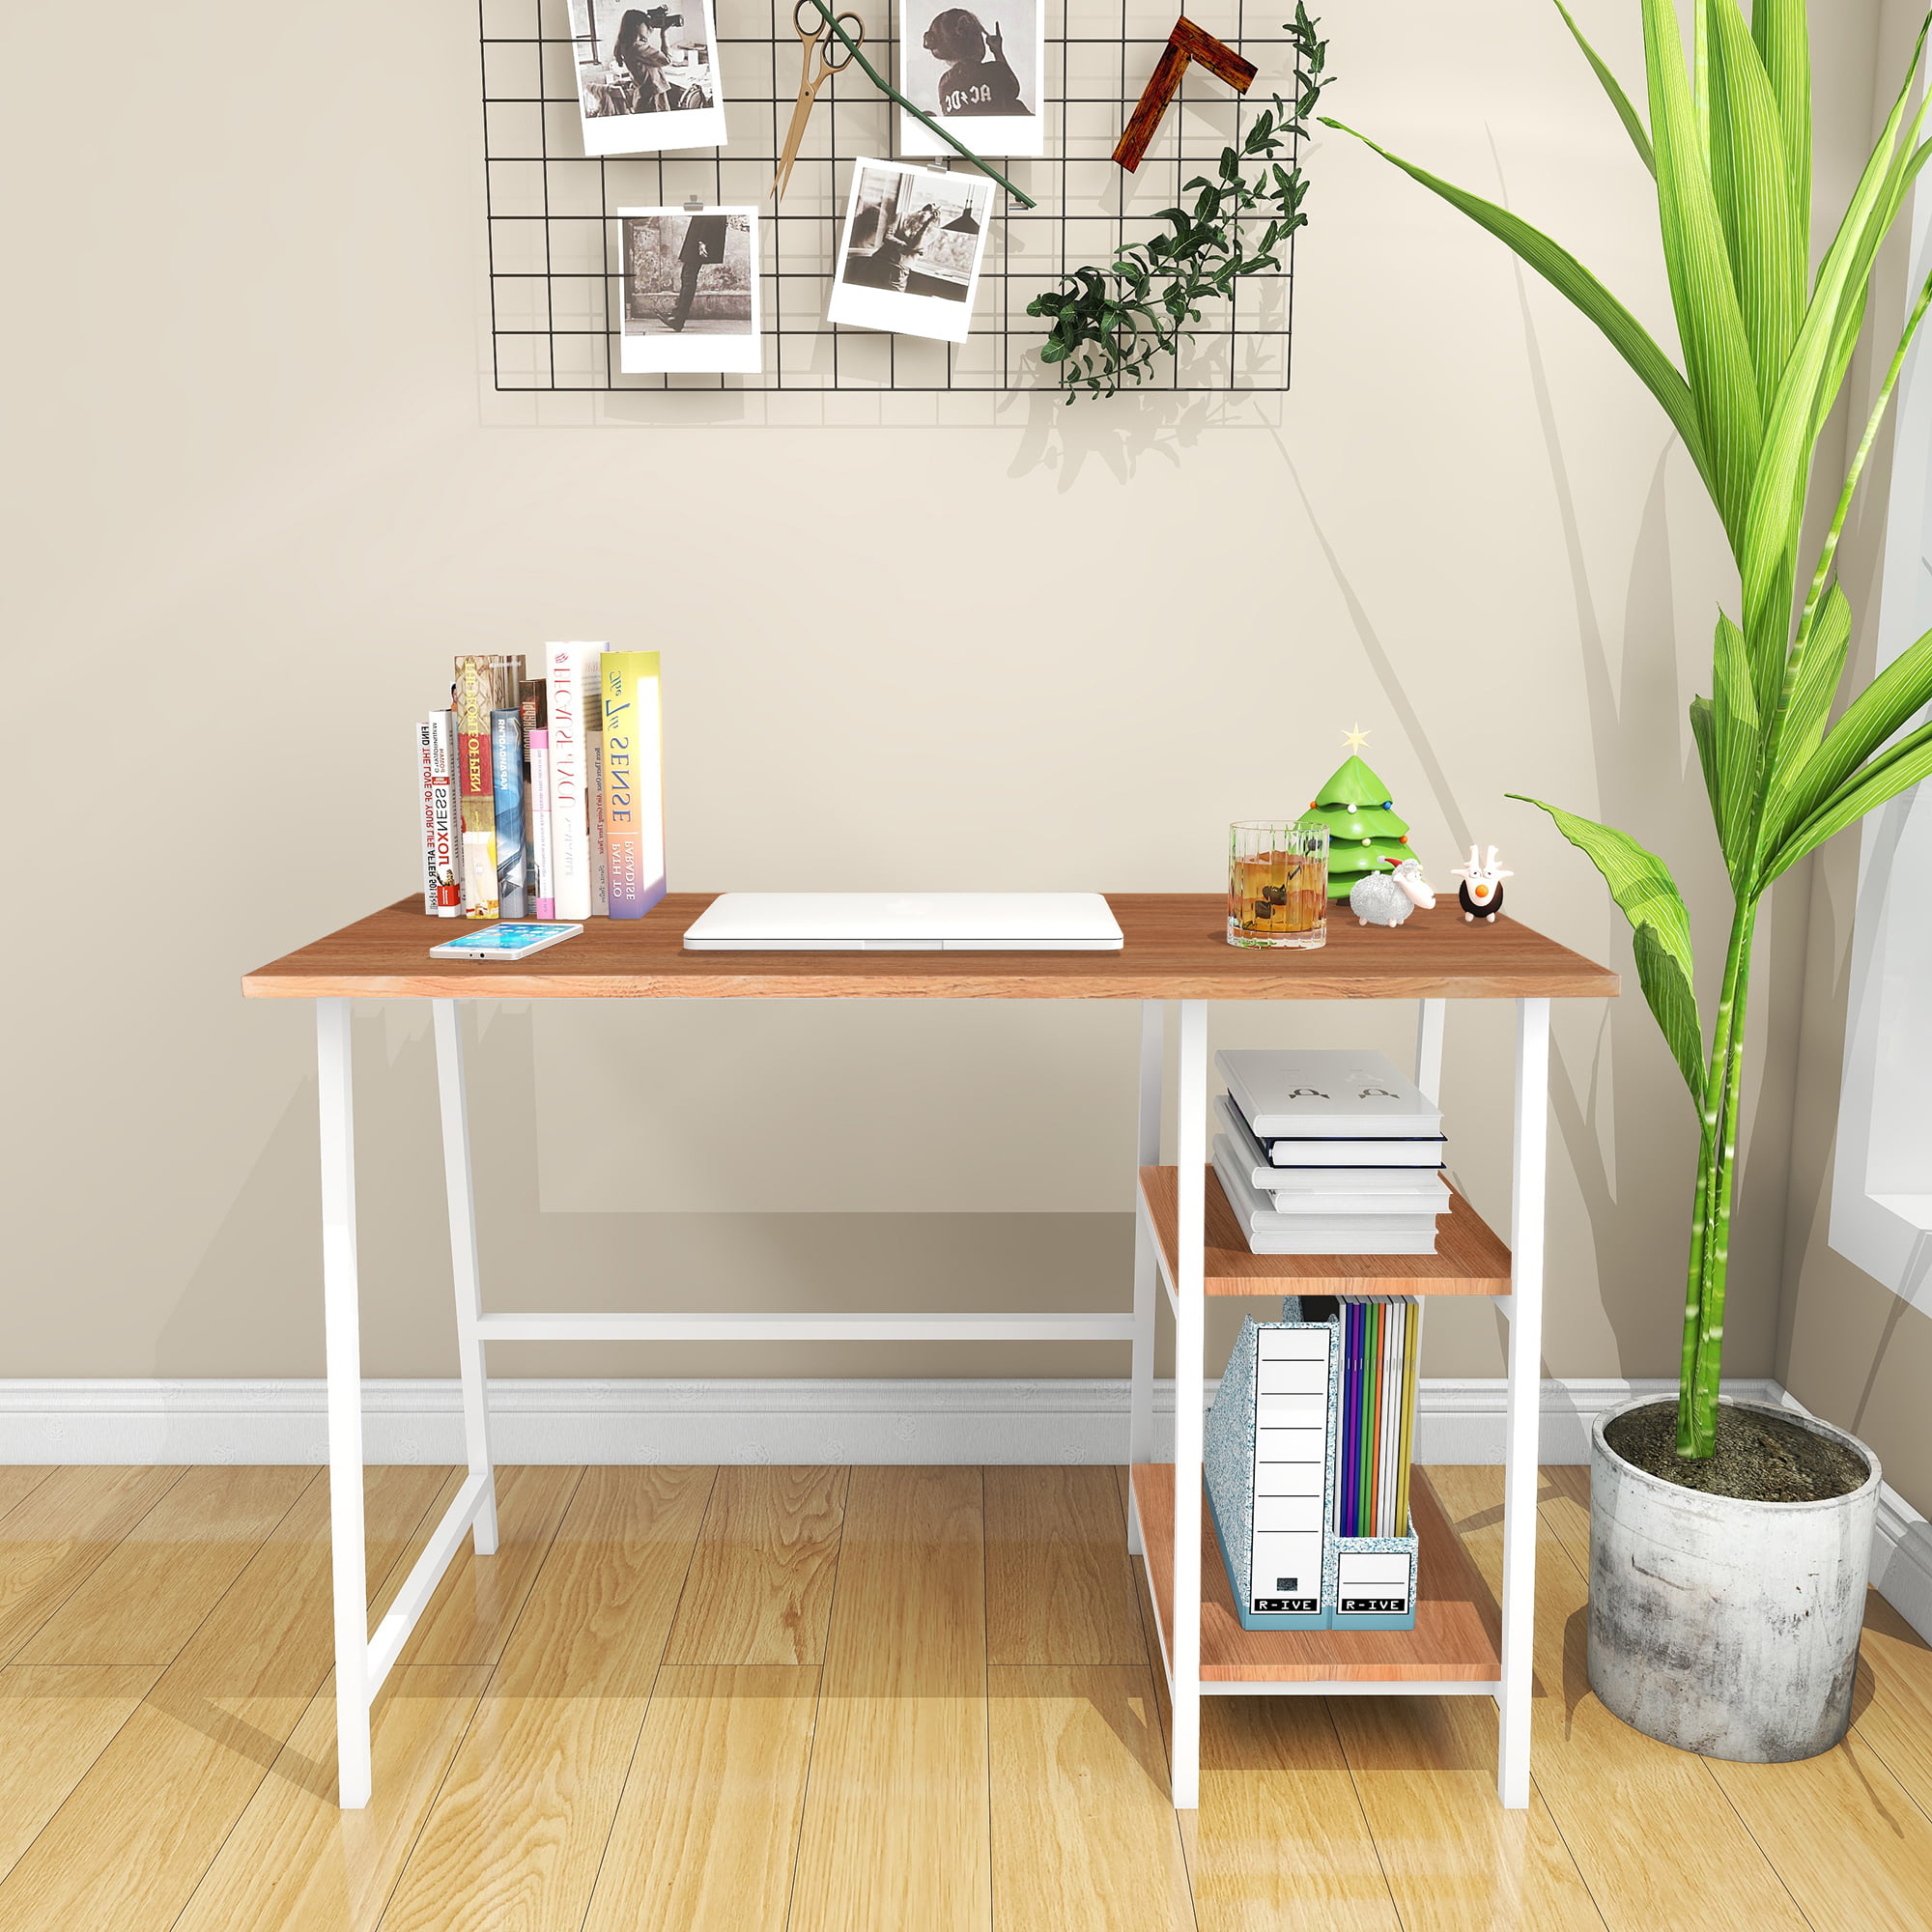 Details about   Wood Computer Desk PC Laptop Table Workstation Study Writing Home Office w Shelf 